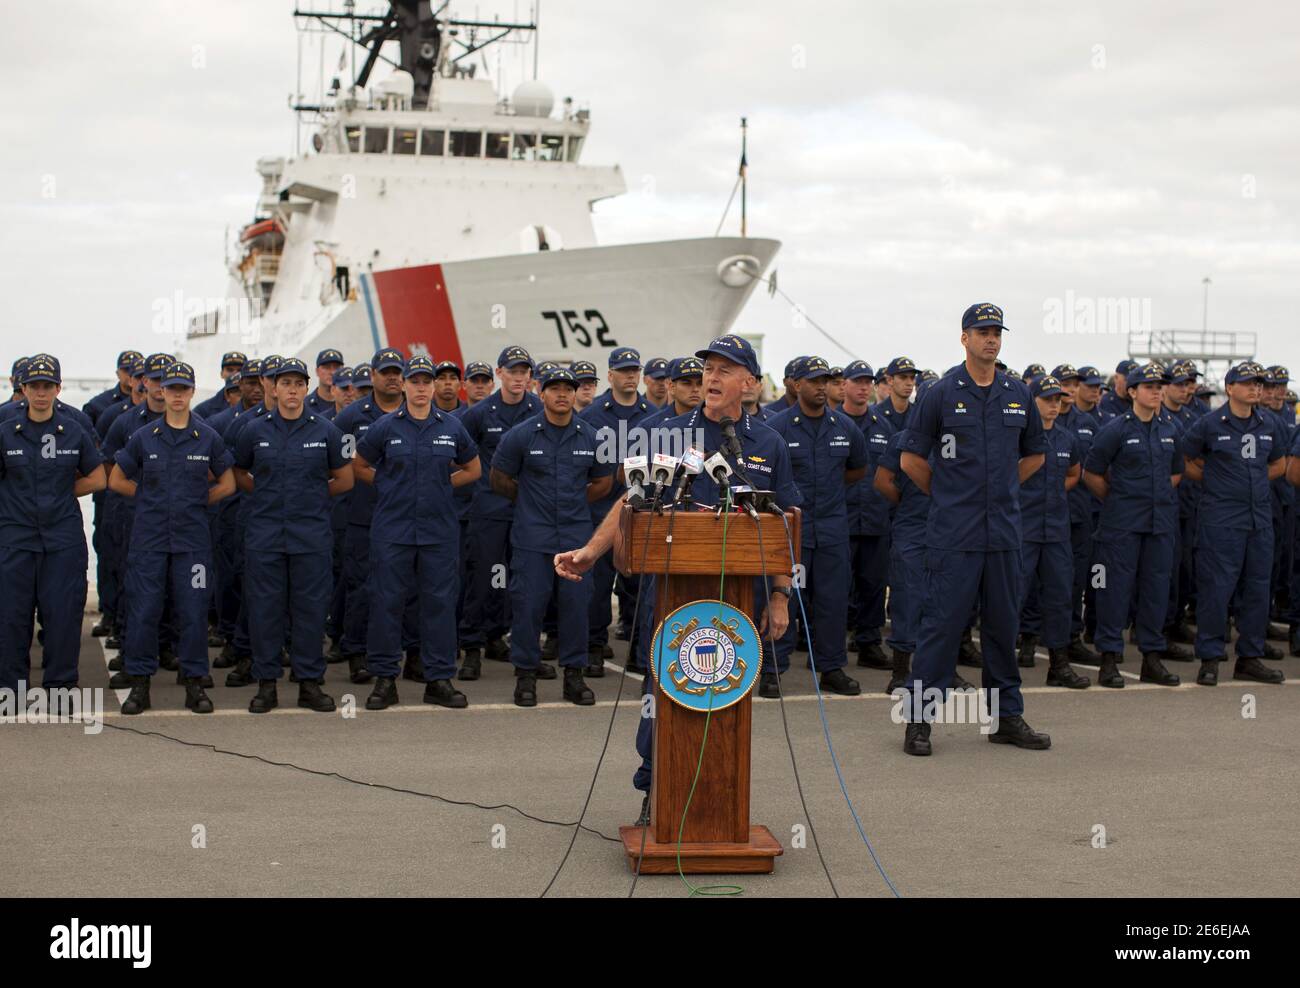 U.S. Coast Guard Commandant Admiral Paul Zukunft speaks in front of the crew of the Coast Guard Cutter Stratton while announcing 66,000 pounds of cocaine worth $1.01 billion wholesale was seized in the Eastern Pacific Ocean upon the ship's arrival in San Diego, California August 10, 2015. Zukunft, announced the Coast Guard and partner agencies had seized more cocaine in the Eastern Pacific Ocean in the last 10 months than in fiscal years 2012 through 2014 combined.  REUTERS/Mike Blake Stock Photo